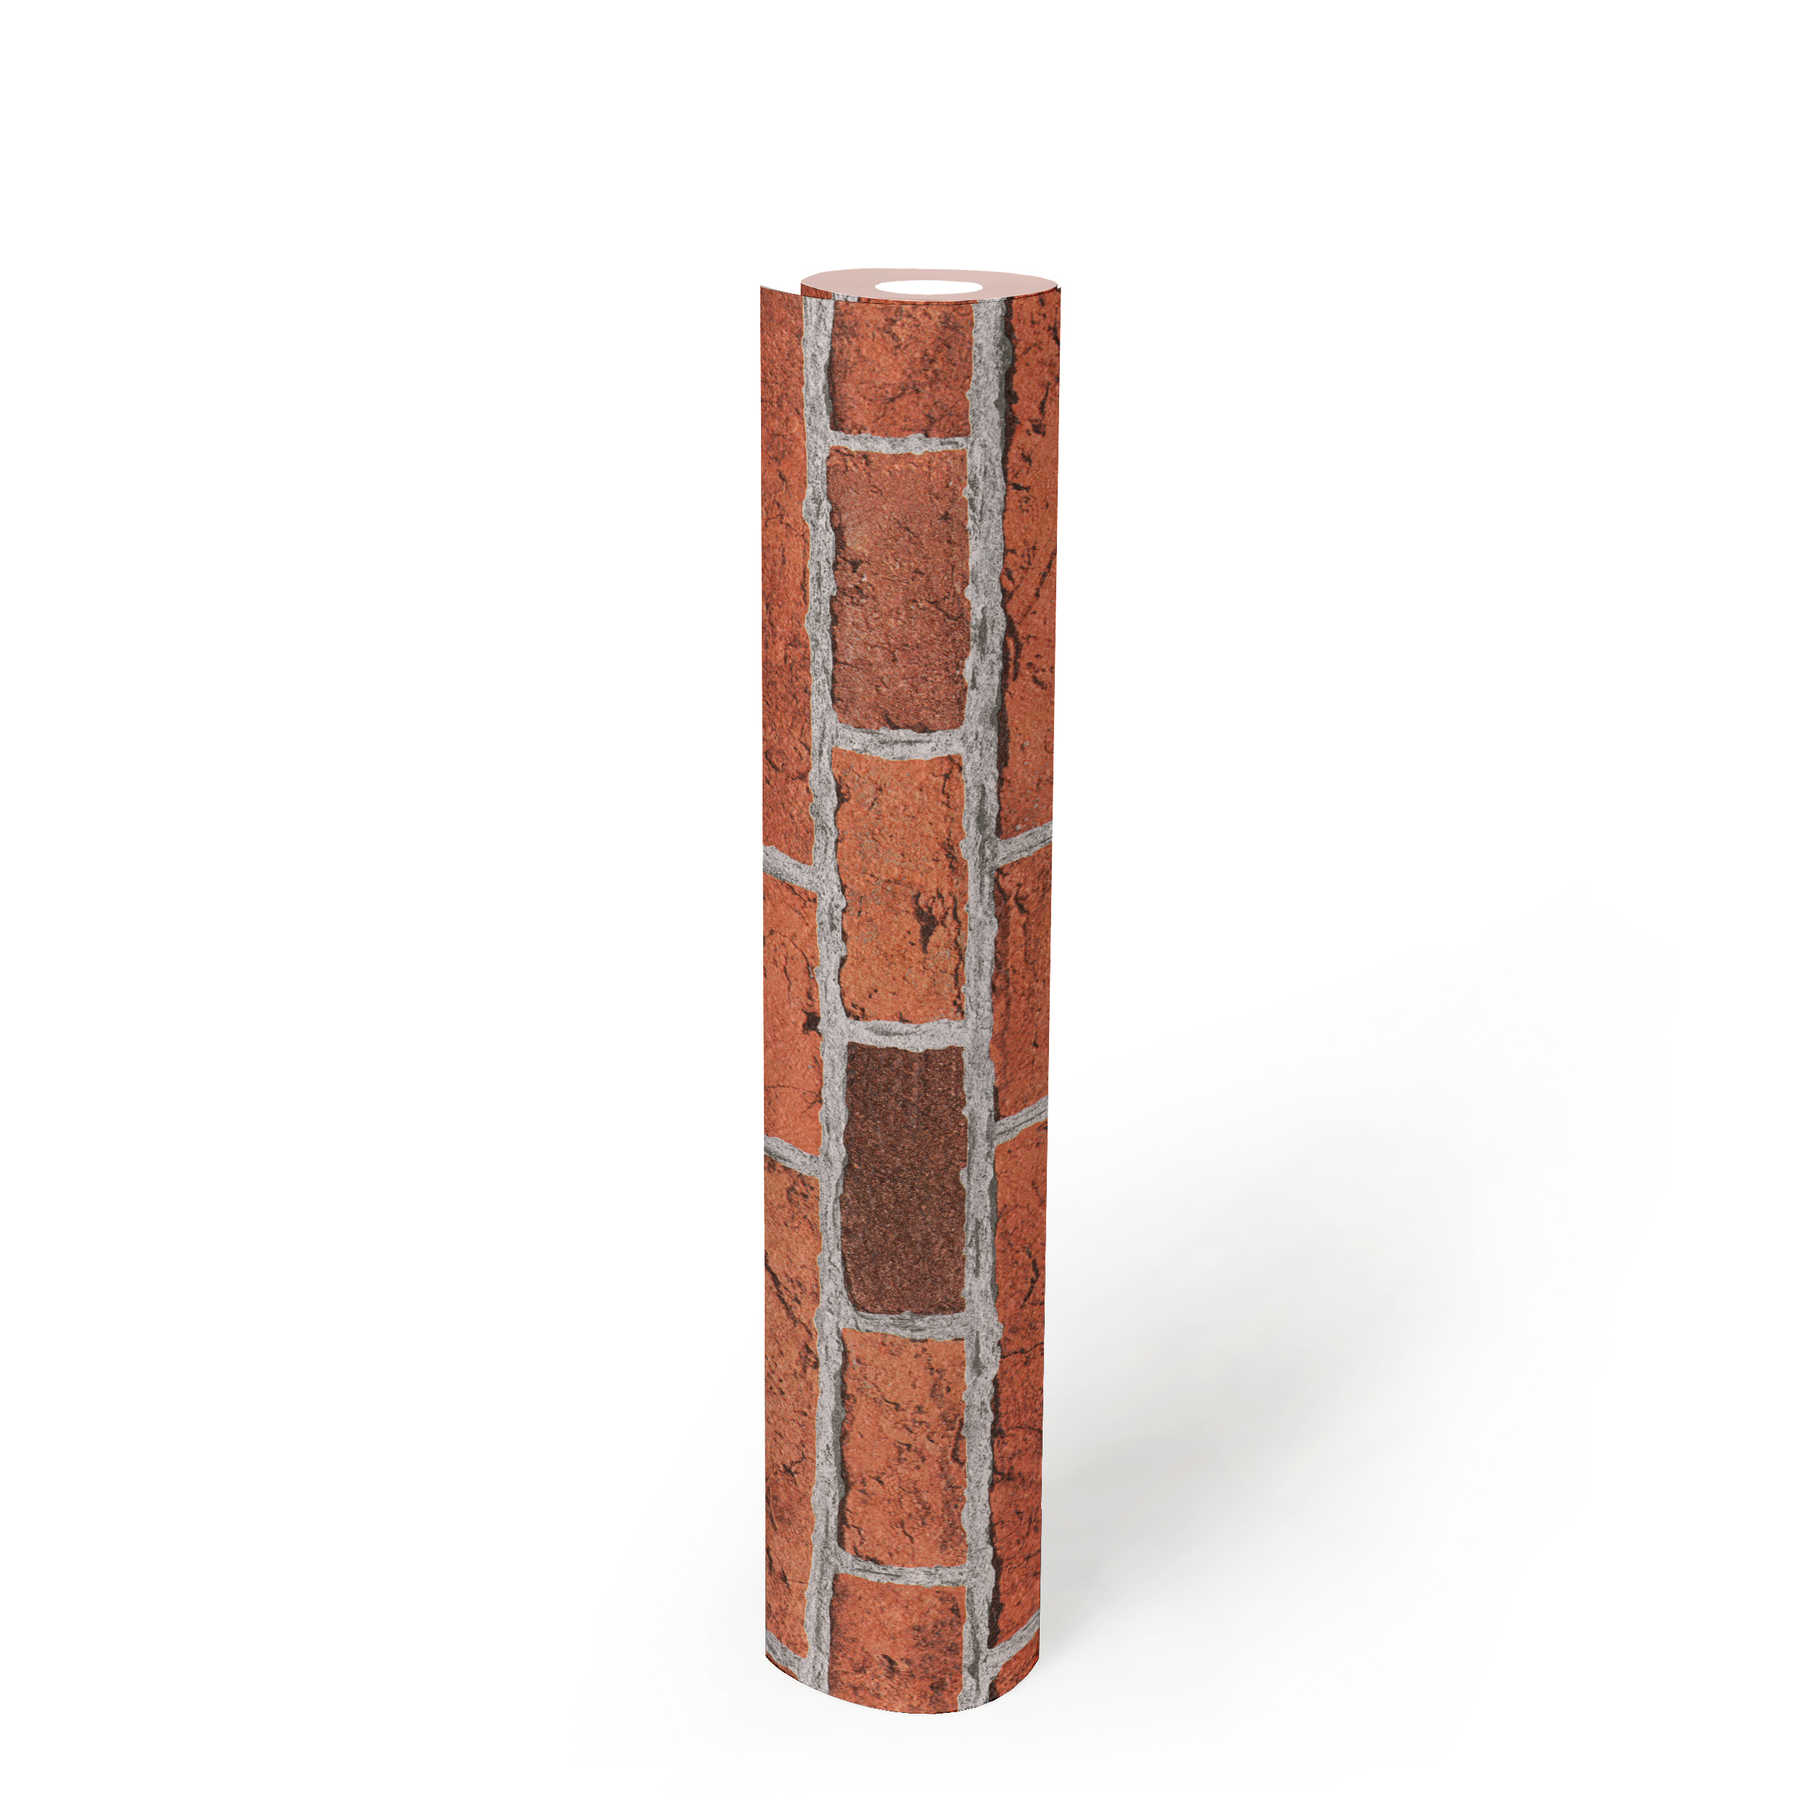             Stone wallpaper rustic with brick wall stylized - red, grey
        